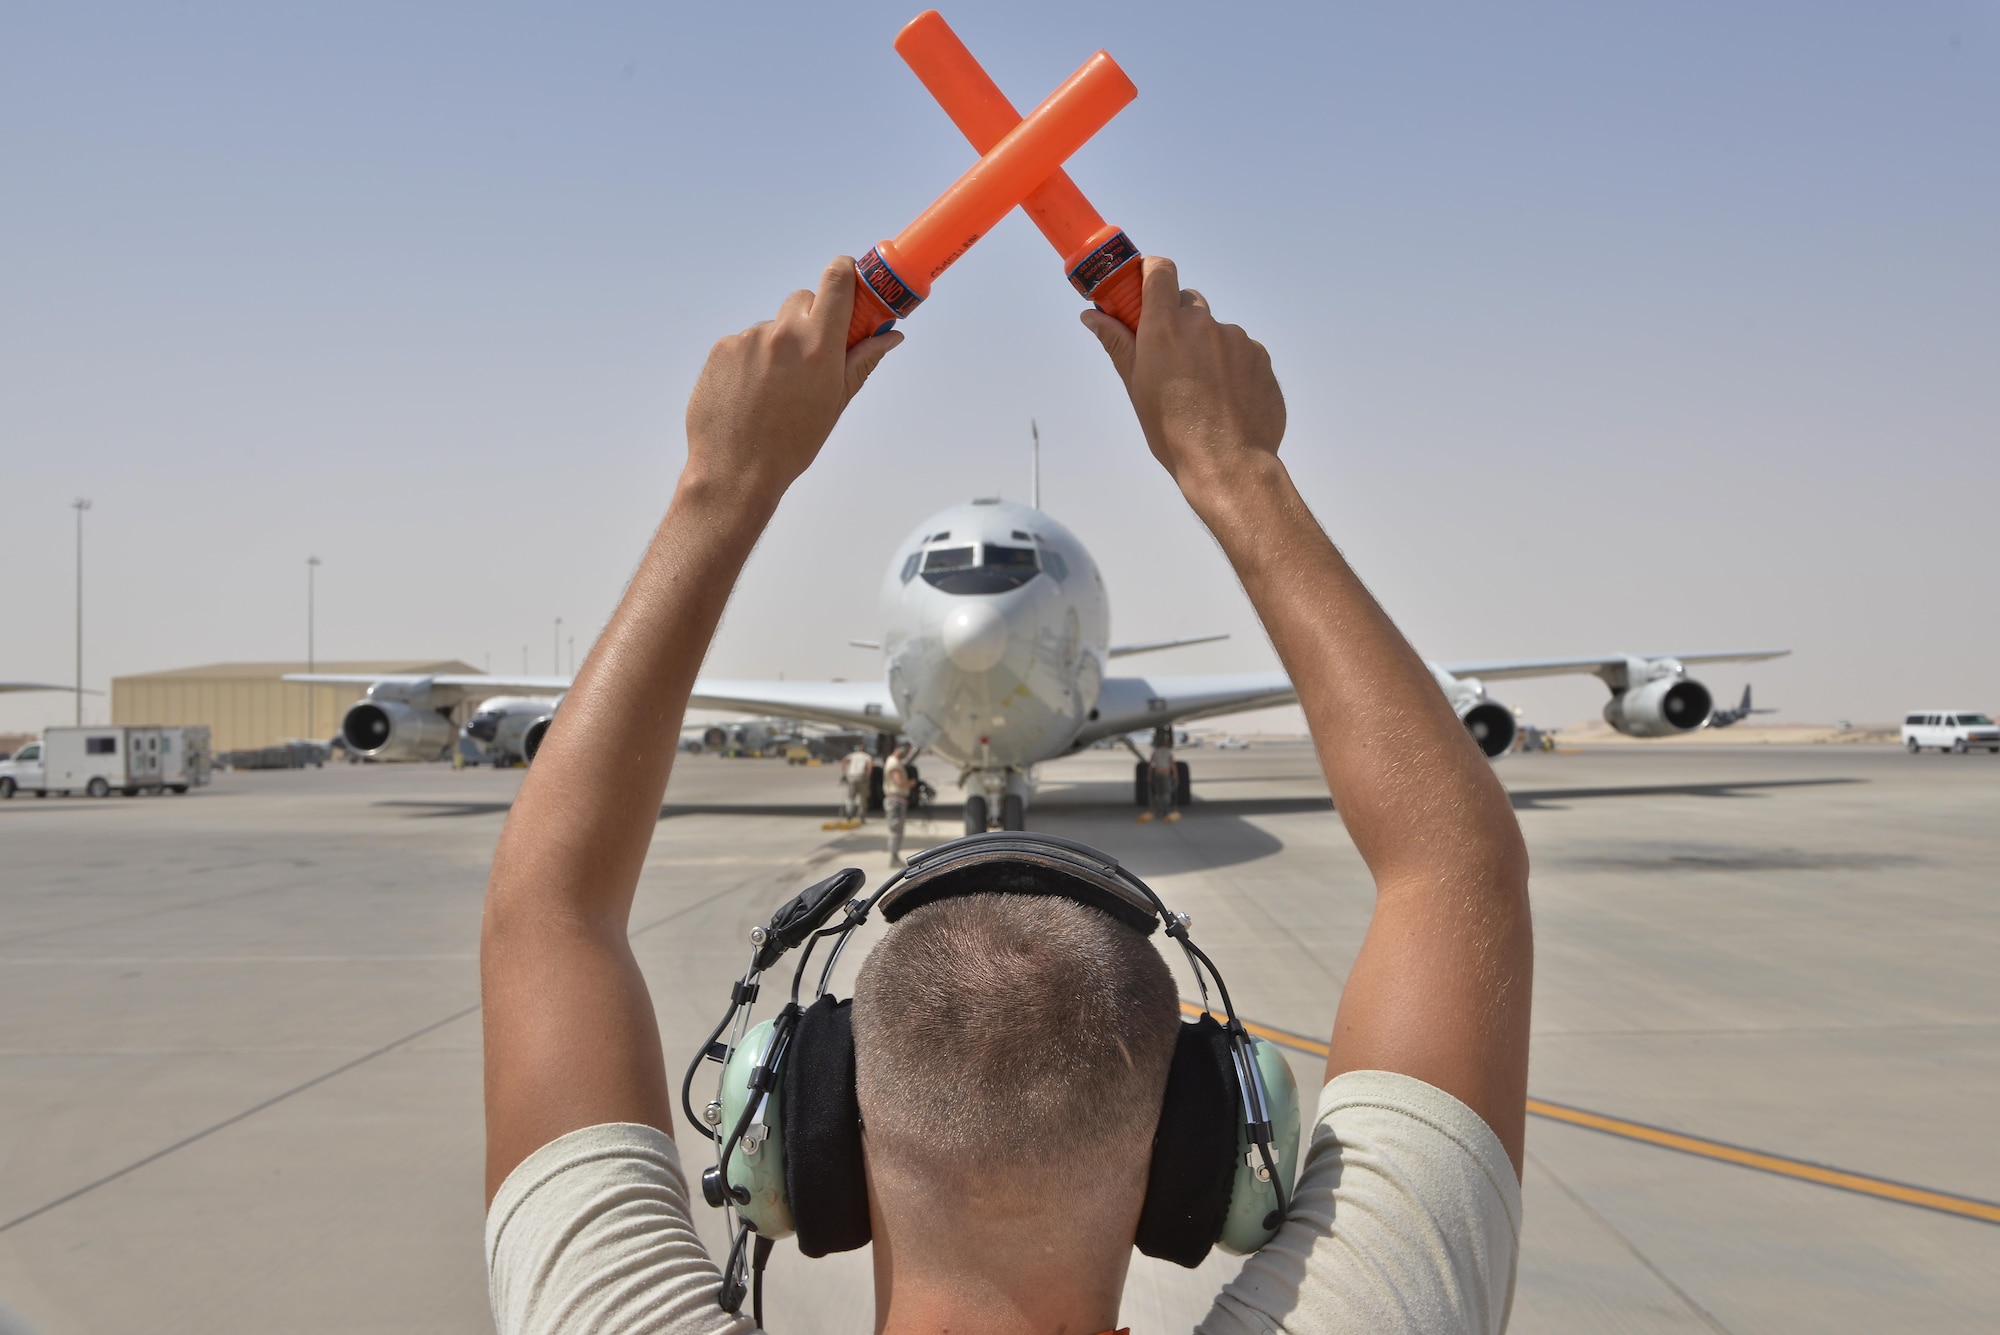 An Airman form the 7th Expeditionary Air Mobility Unit directs a Boeing E-8C Joint Surveillance Target Attack Radar Systems aircraft to park after completing its 100K combat hours milestone mission June 2, 2015 Al Udeid Air Base, Qatar. The E-8C JSTARS and its active duty, guard and reserve service members conduct missions overseas to support operations on the war on terror. During this time JSTARS completed 100K combat hours by continually flying 24/7 for 11.4 years. (U.S. Air Force photo/Staff Sgt. Alexandre Montes)